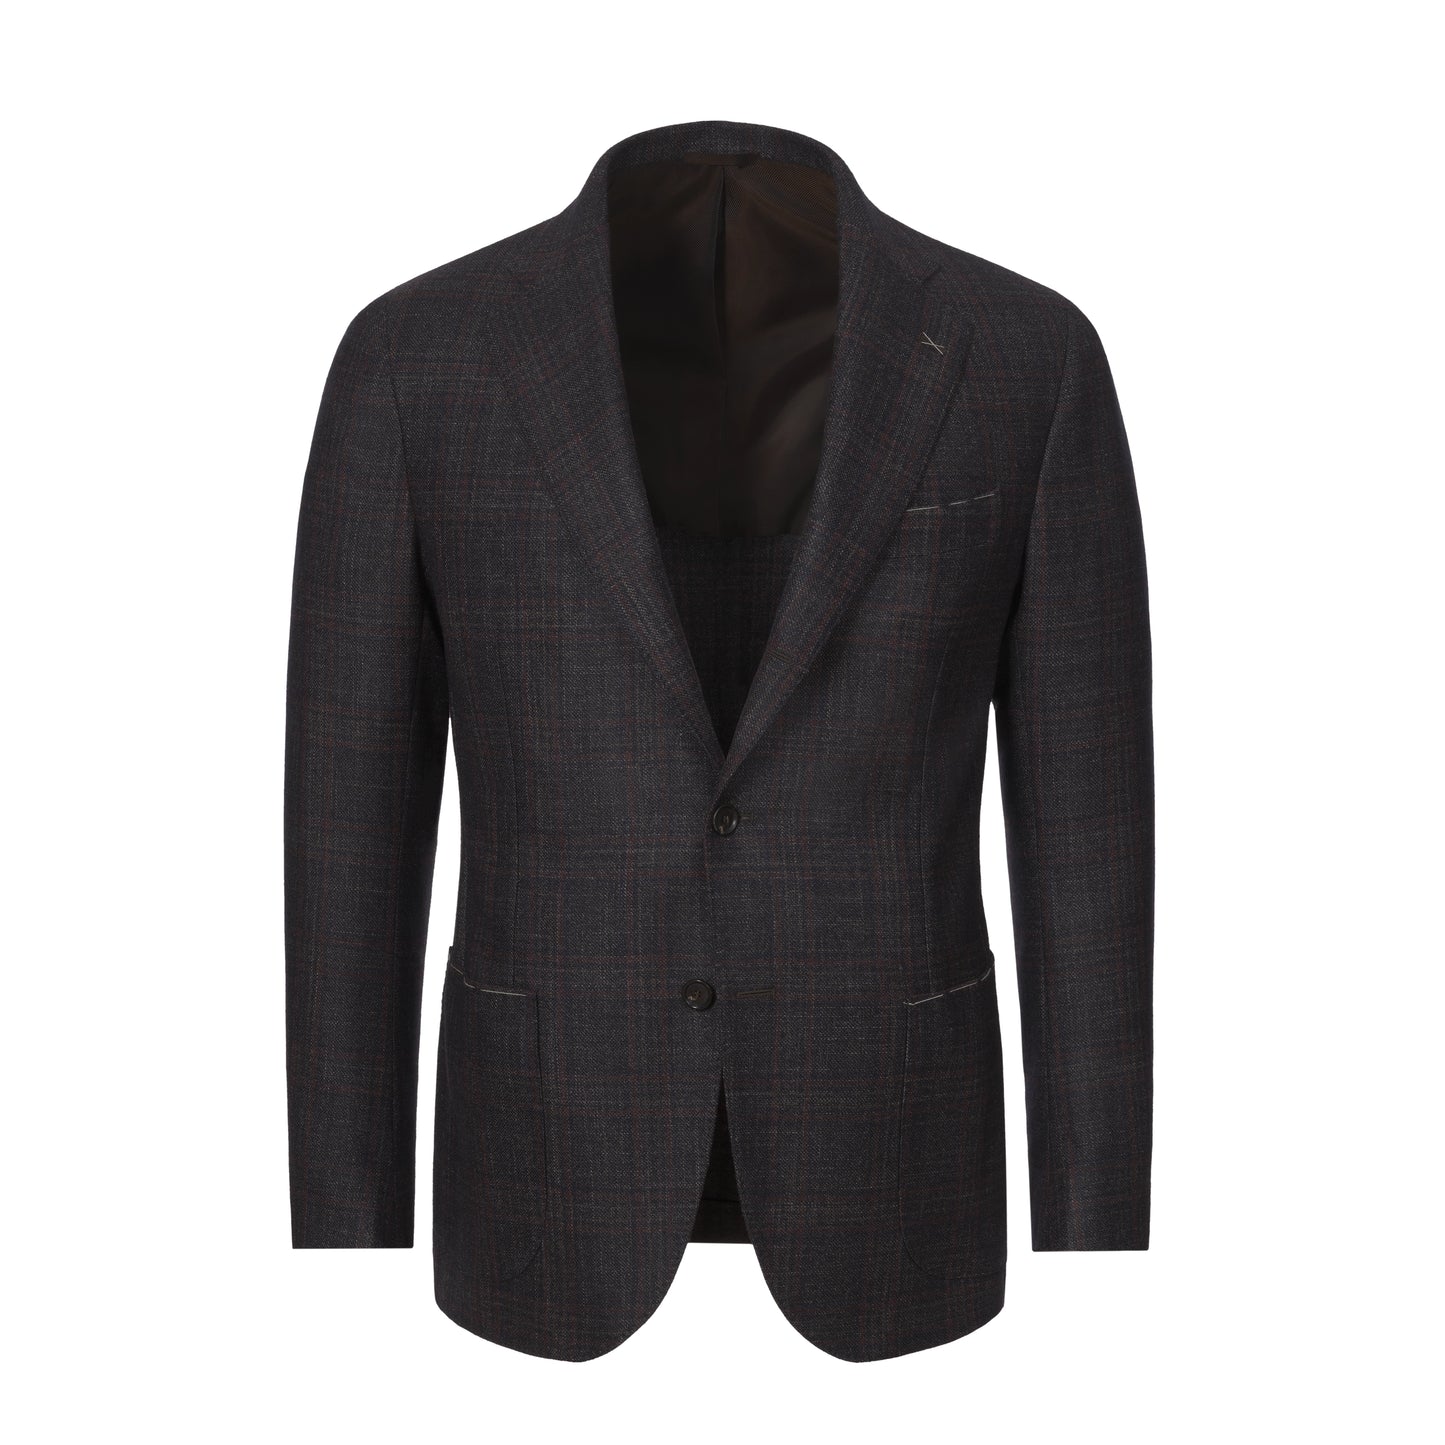 Single-Breasted Wool Jacket in Granite Brown and Red. Exclusively Made for Sartale